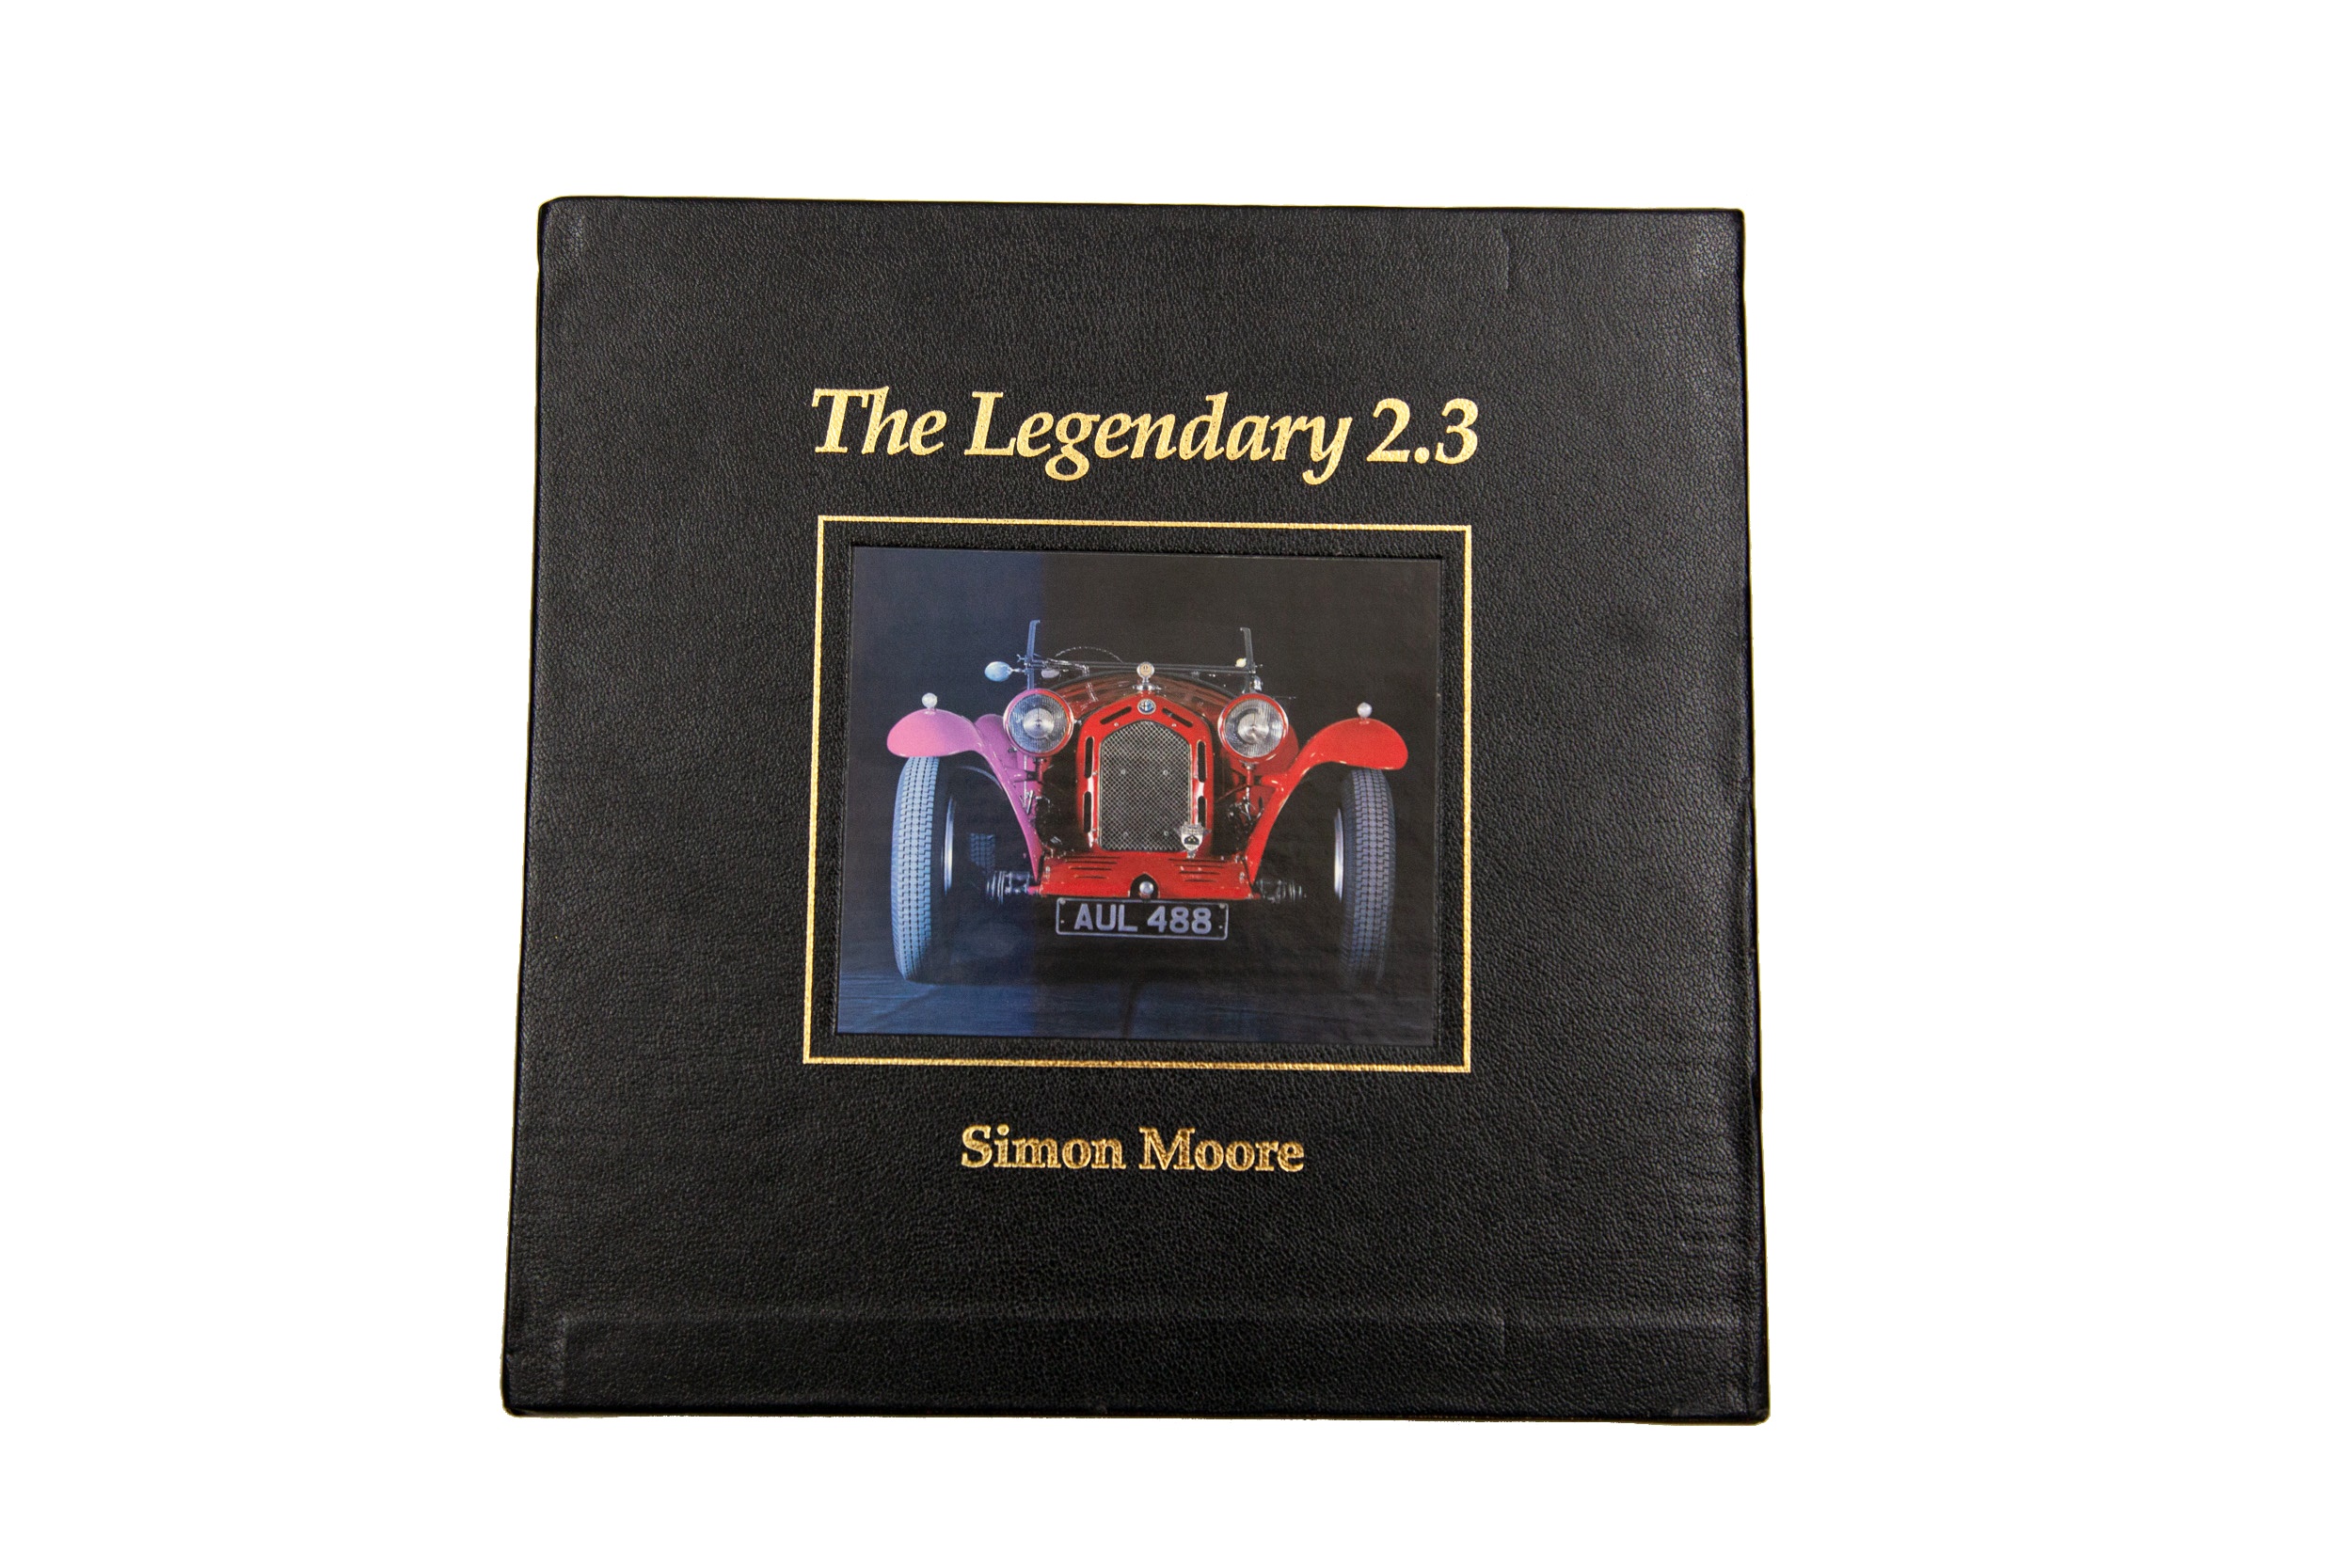 ‘The Legendary 2.3’ by Simon Moore 
No Reserve